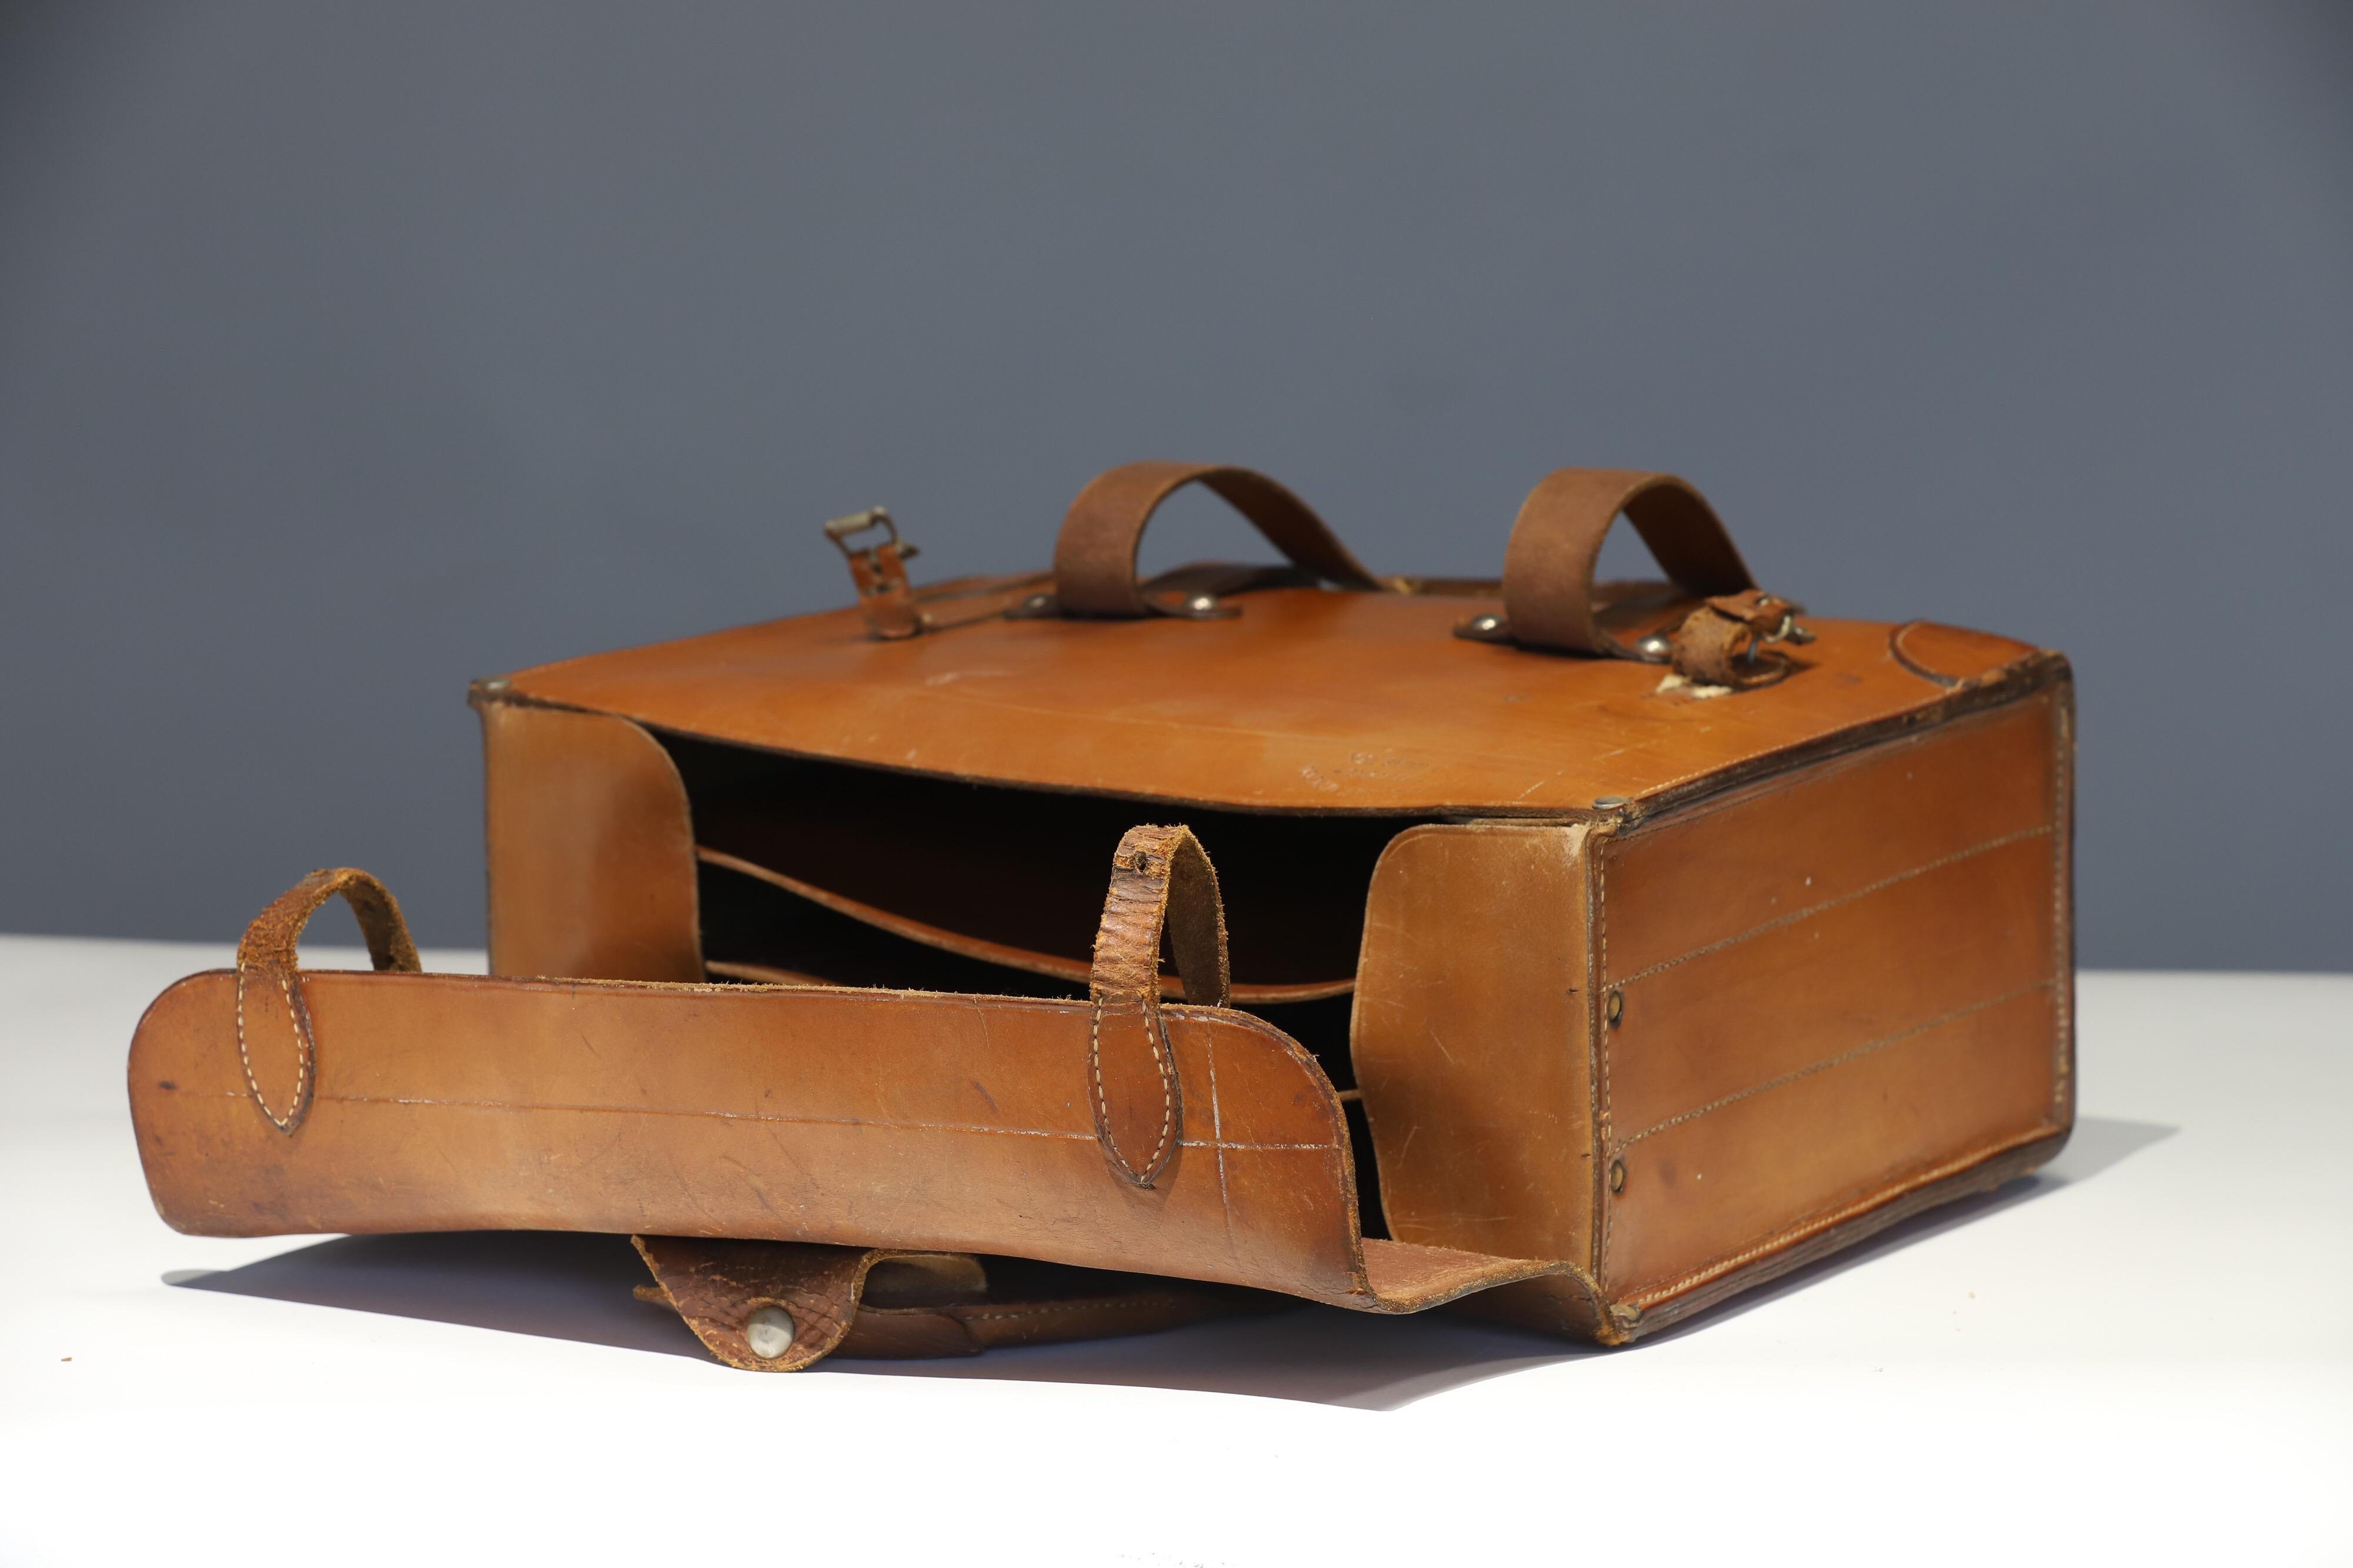 Wilkins Trunk Mfg. Co. Leather Briefcase Bag 4